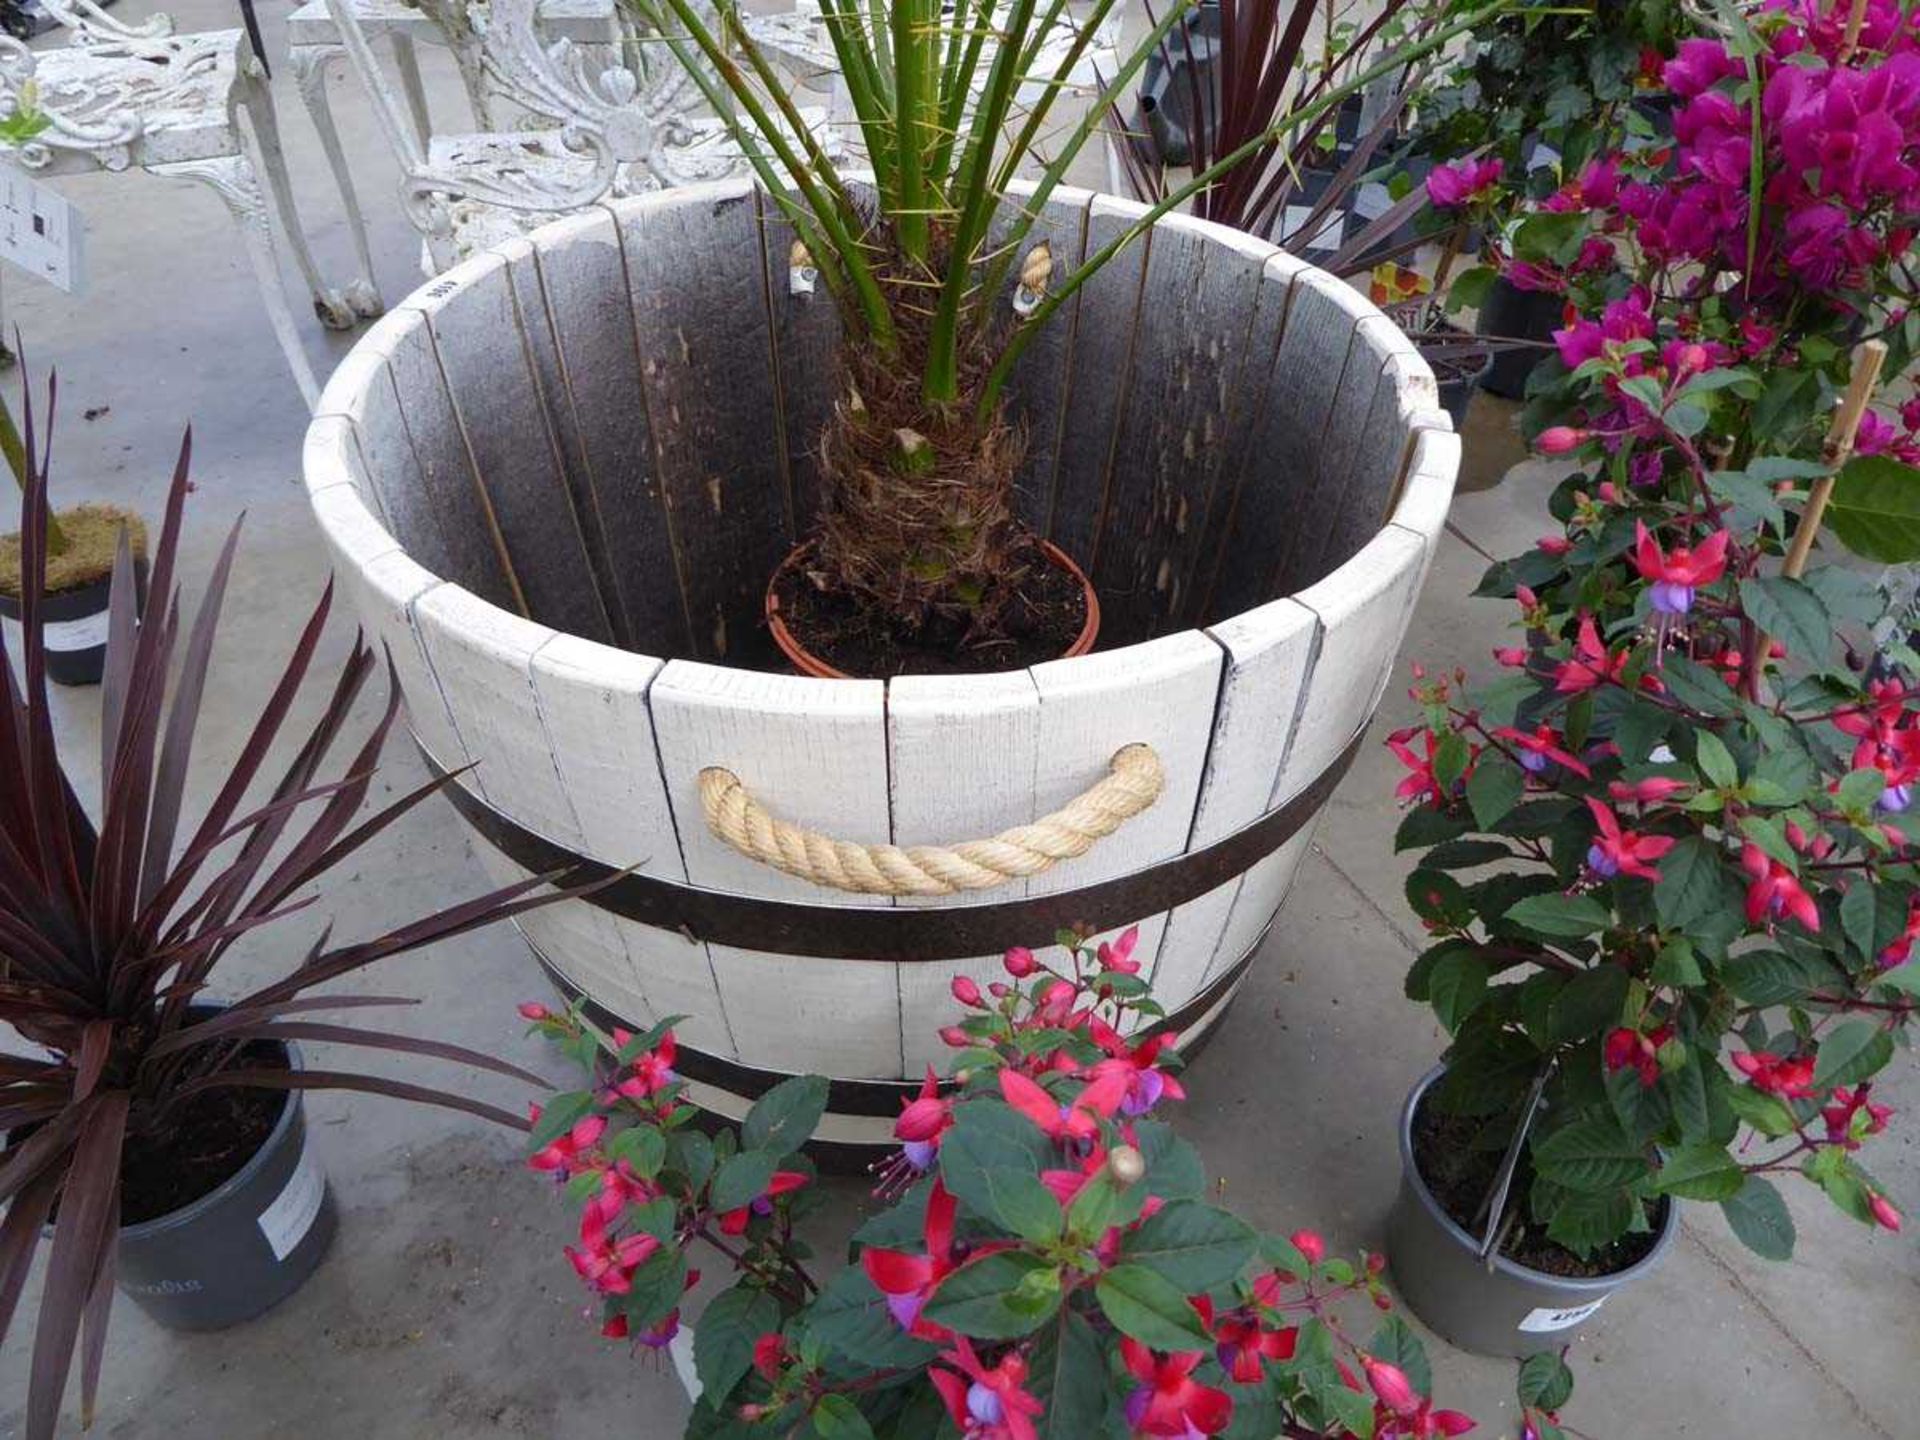 Large cream and brown wooden barrel planter on wheels